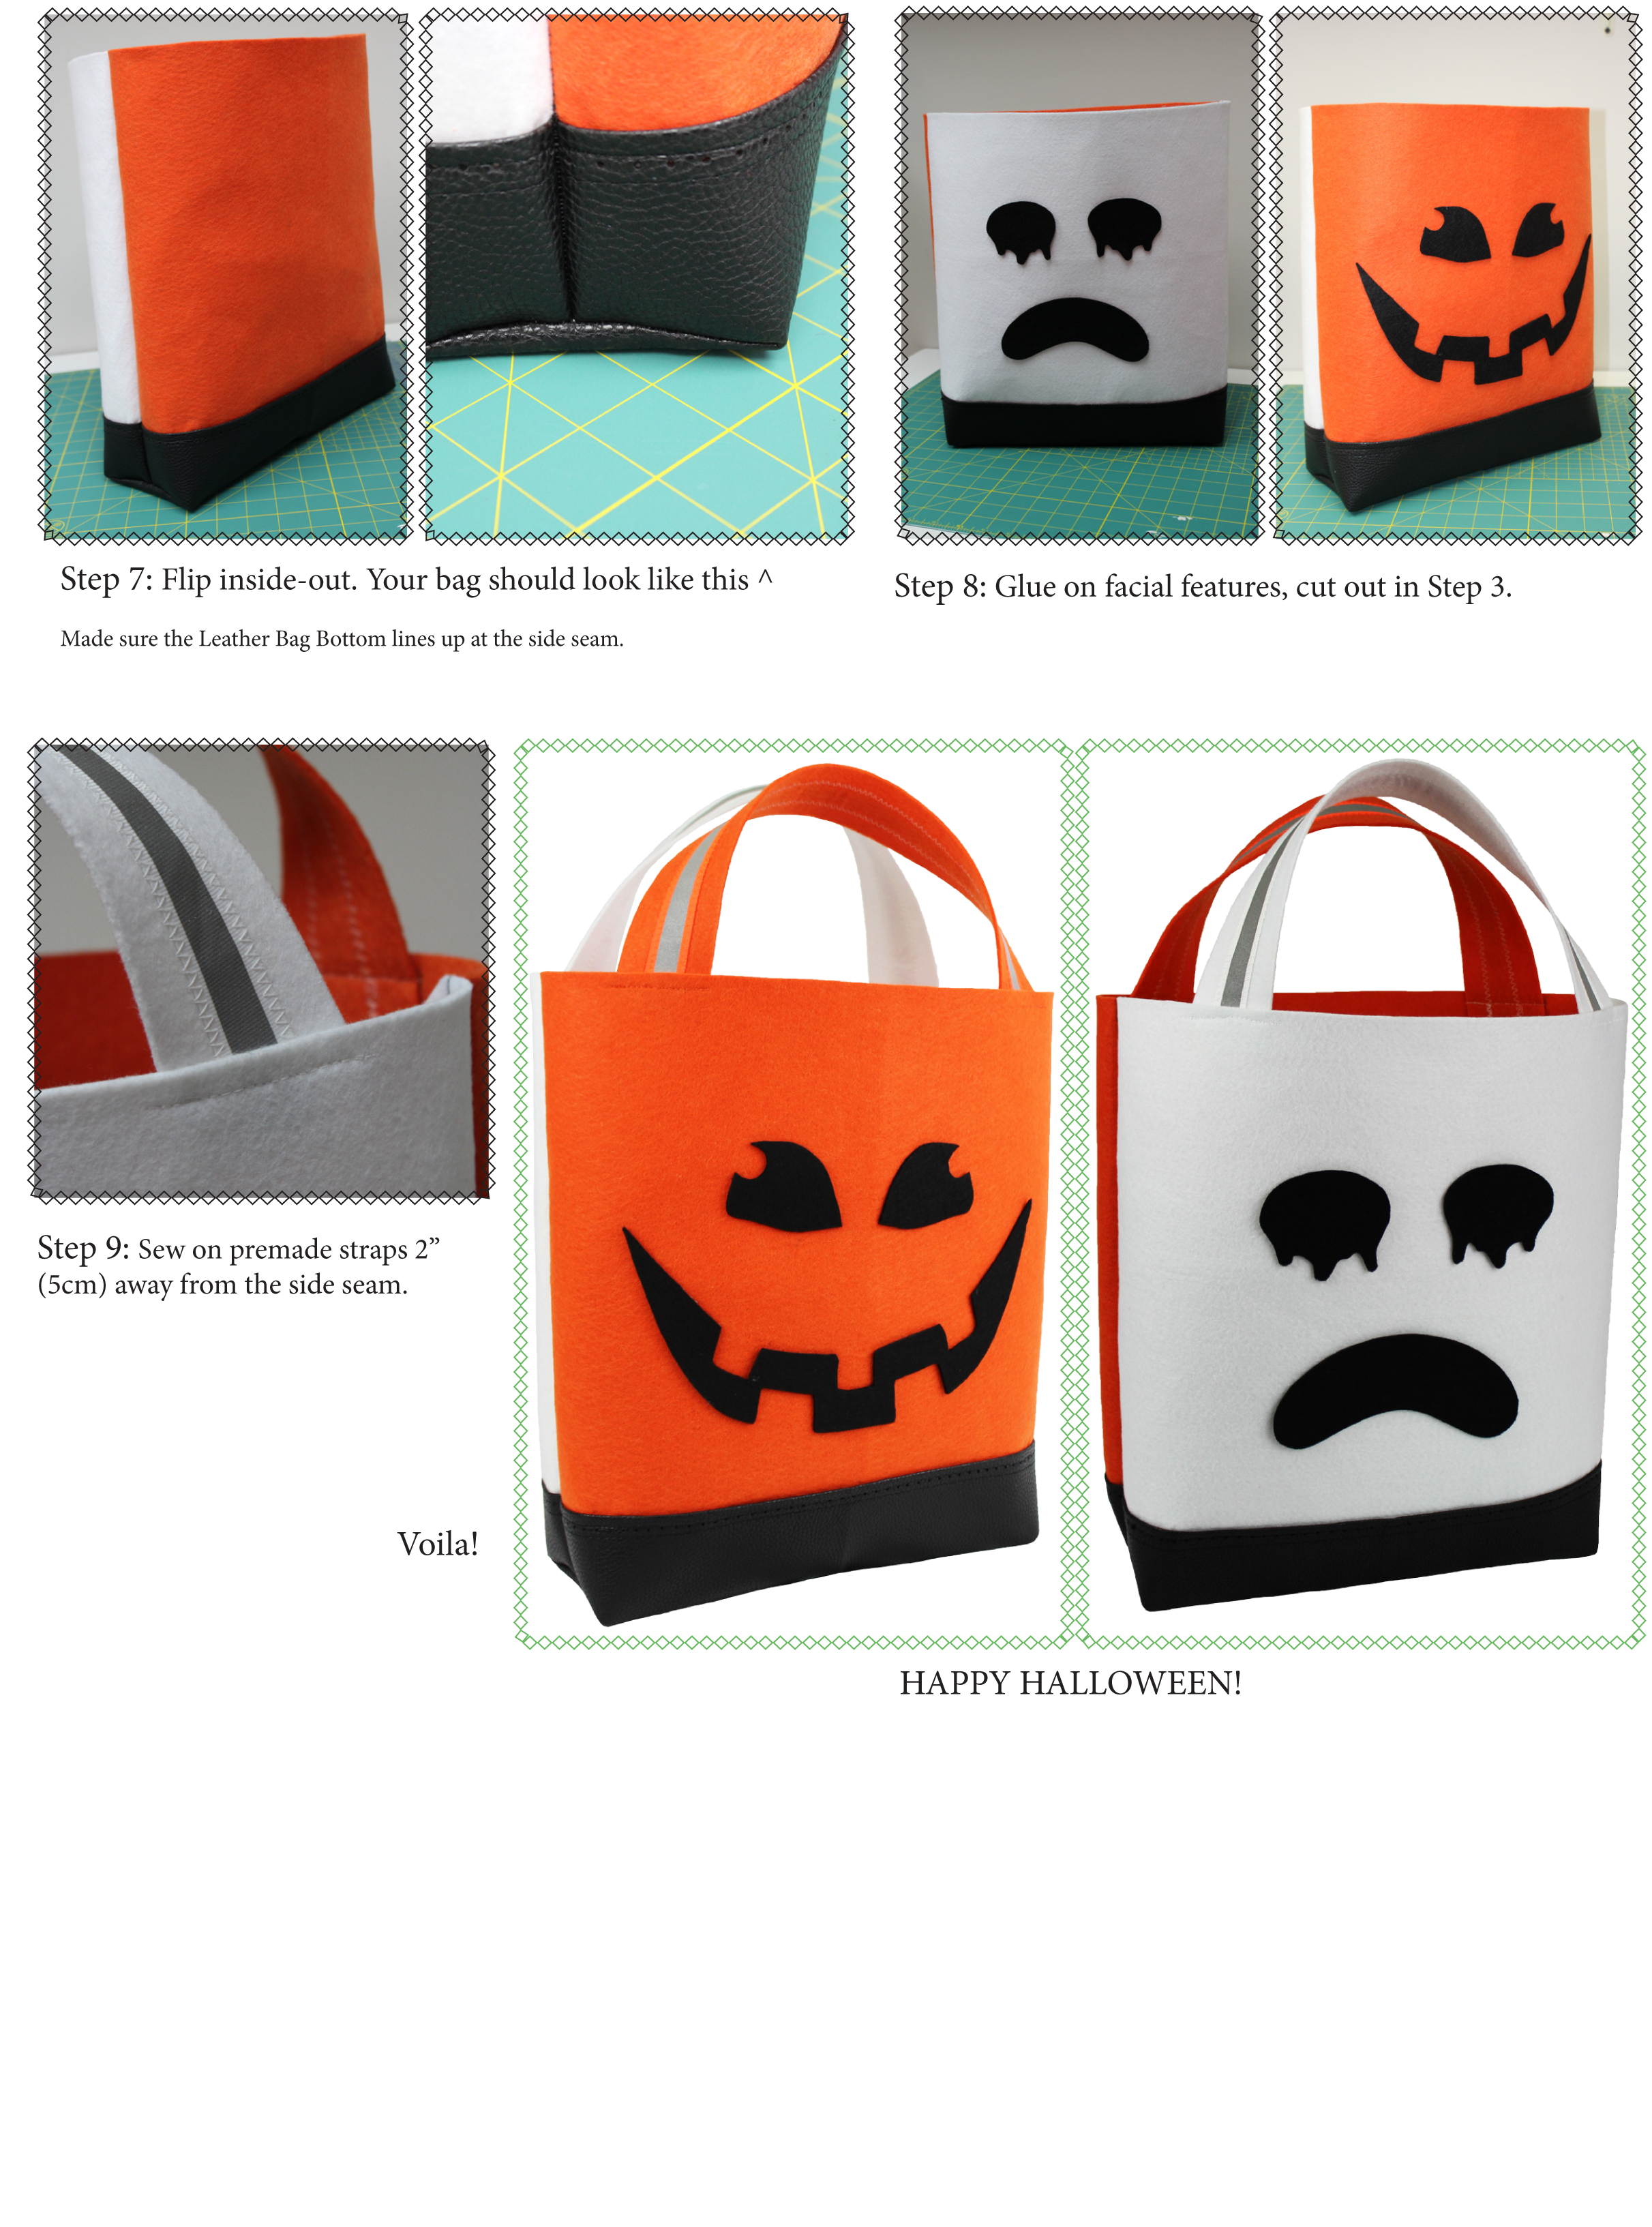 Steps to create your DIY Trick or Treat Bag